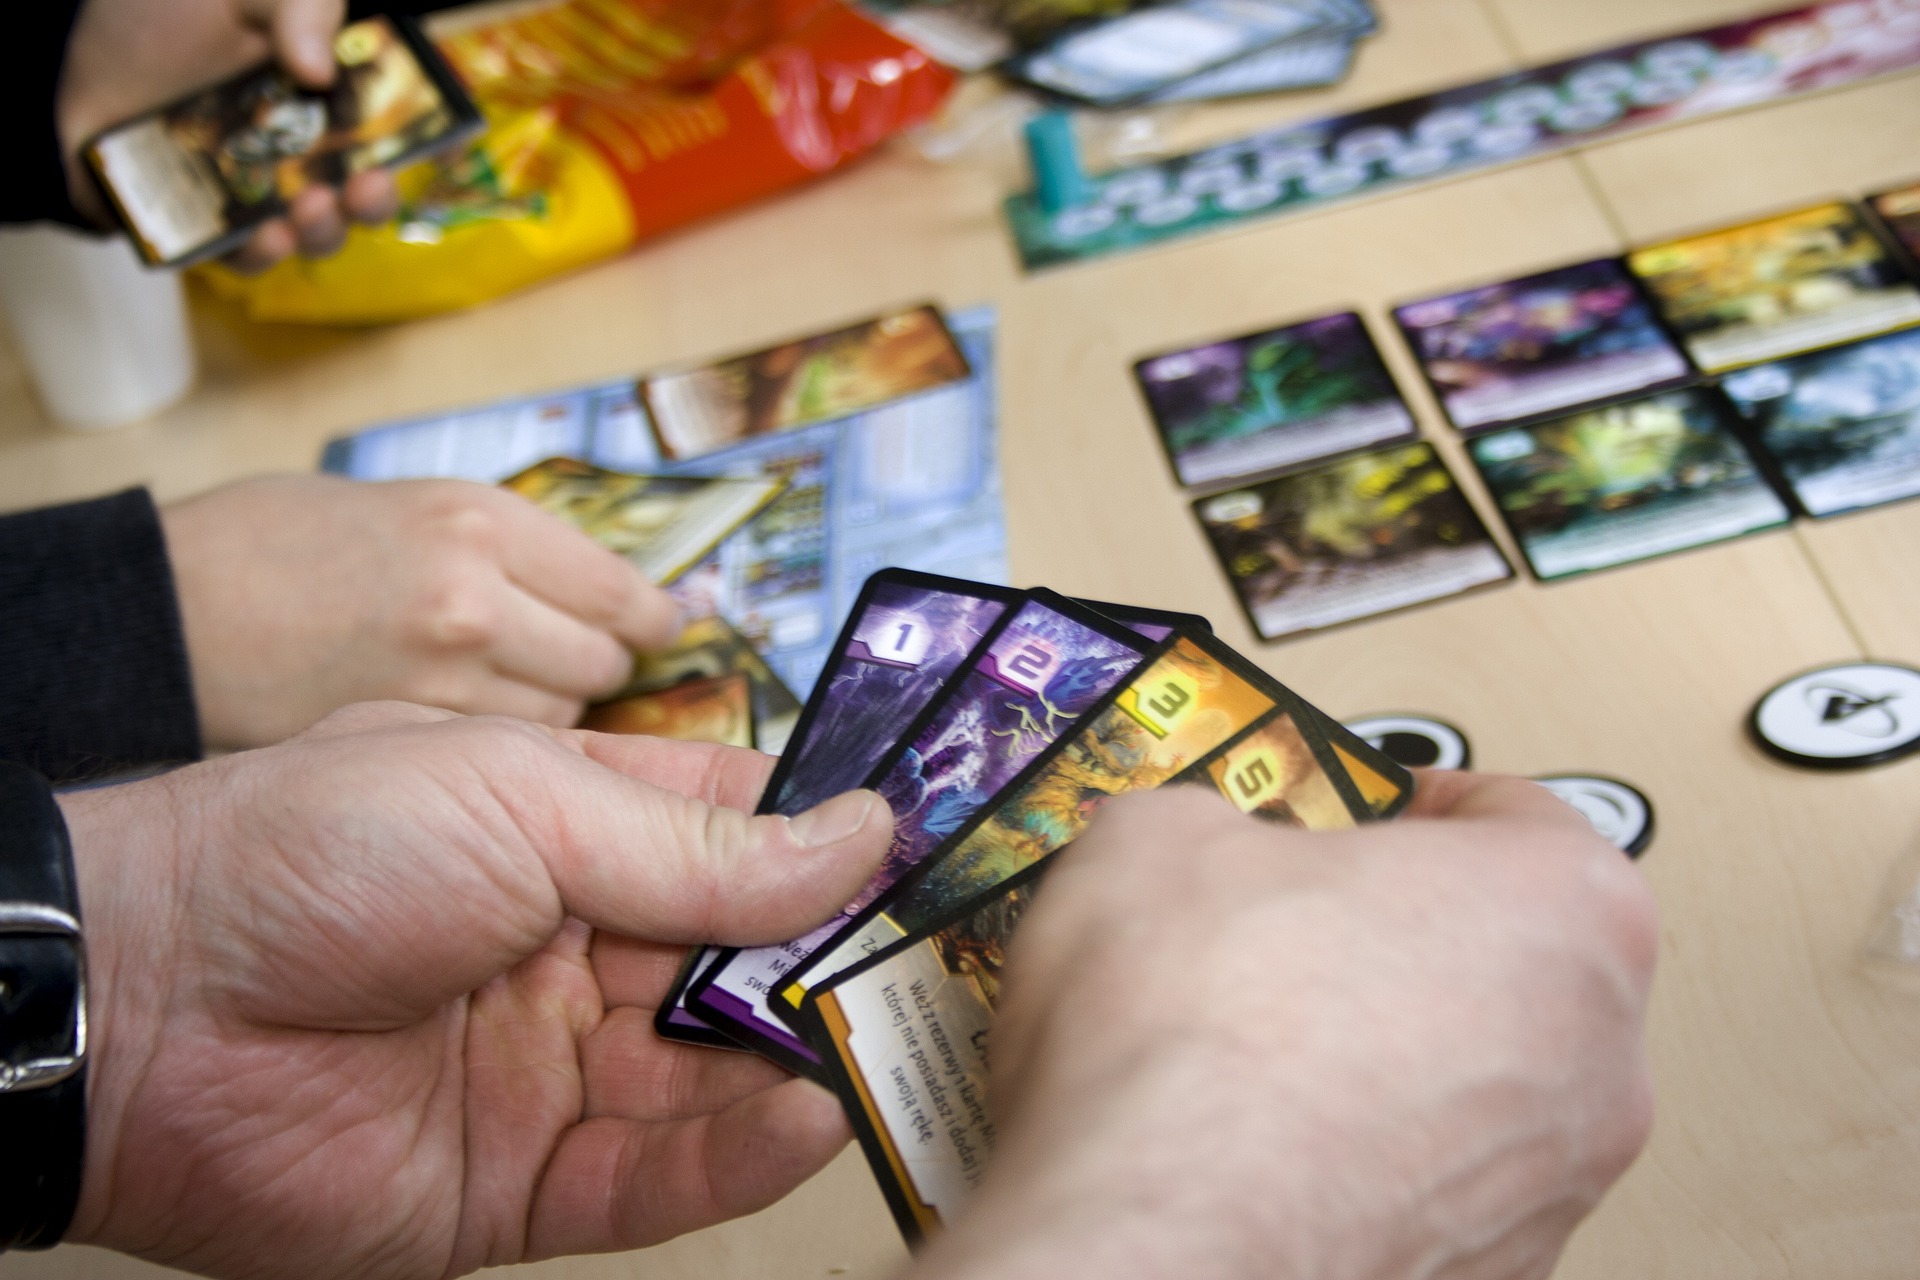 A close-up photo of people playing card games.